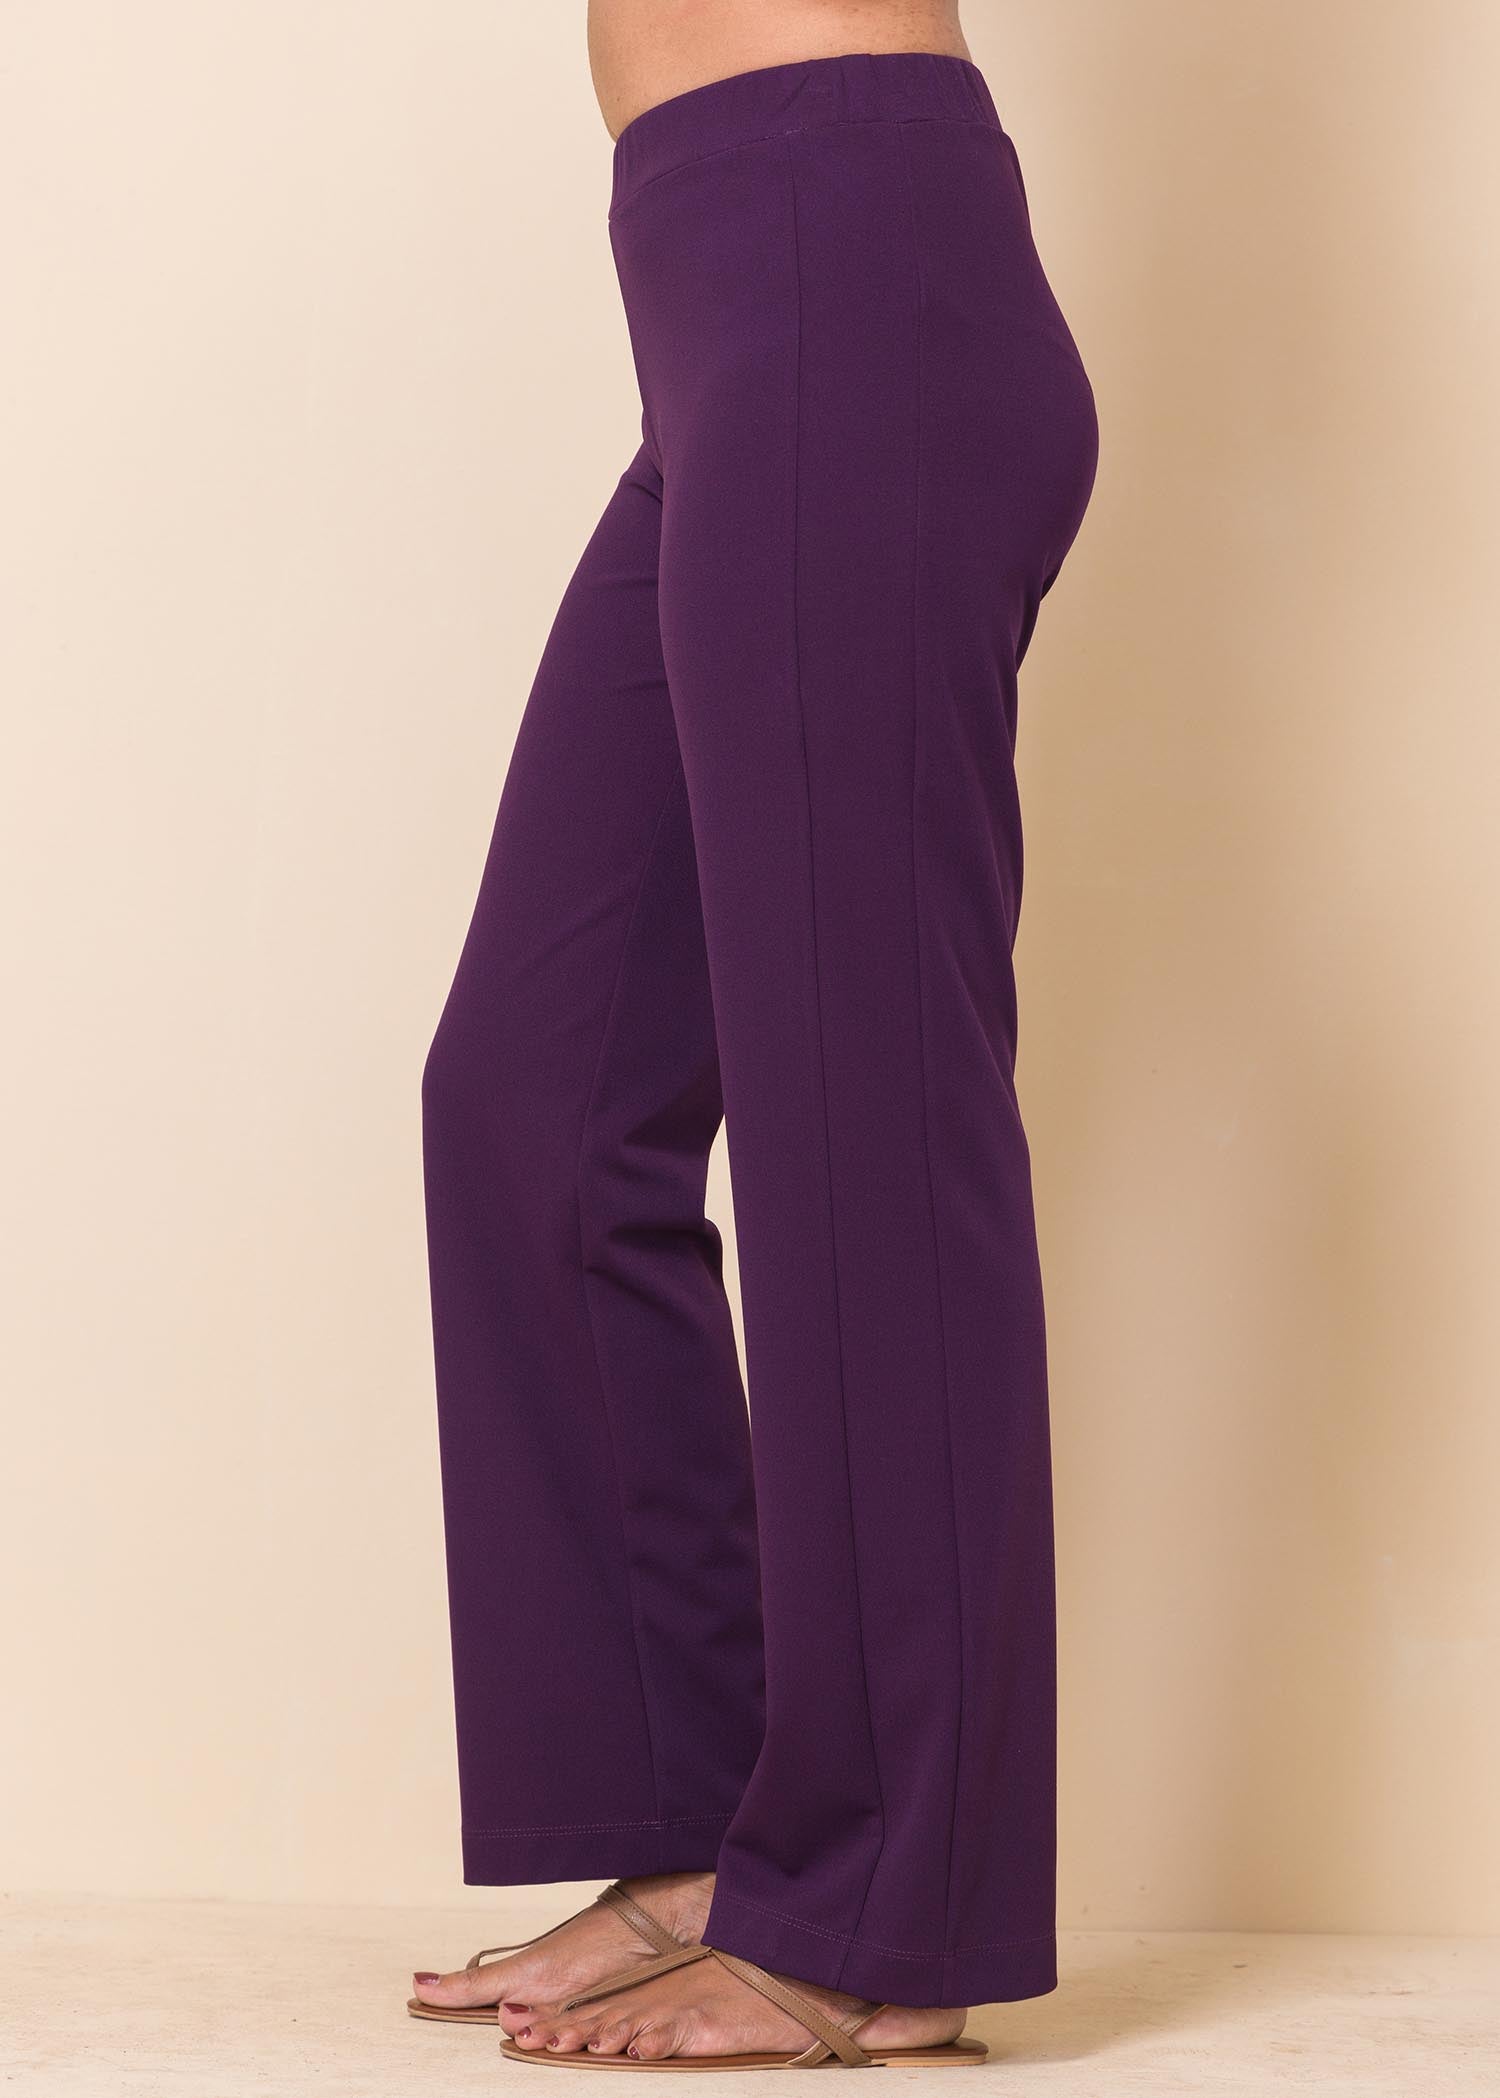 Straight legged pant with side panel